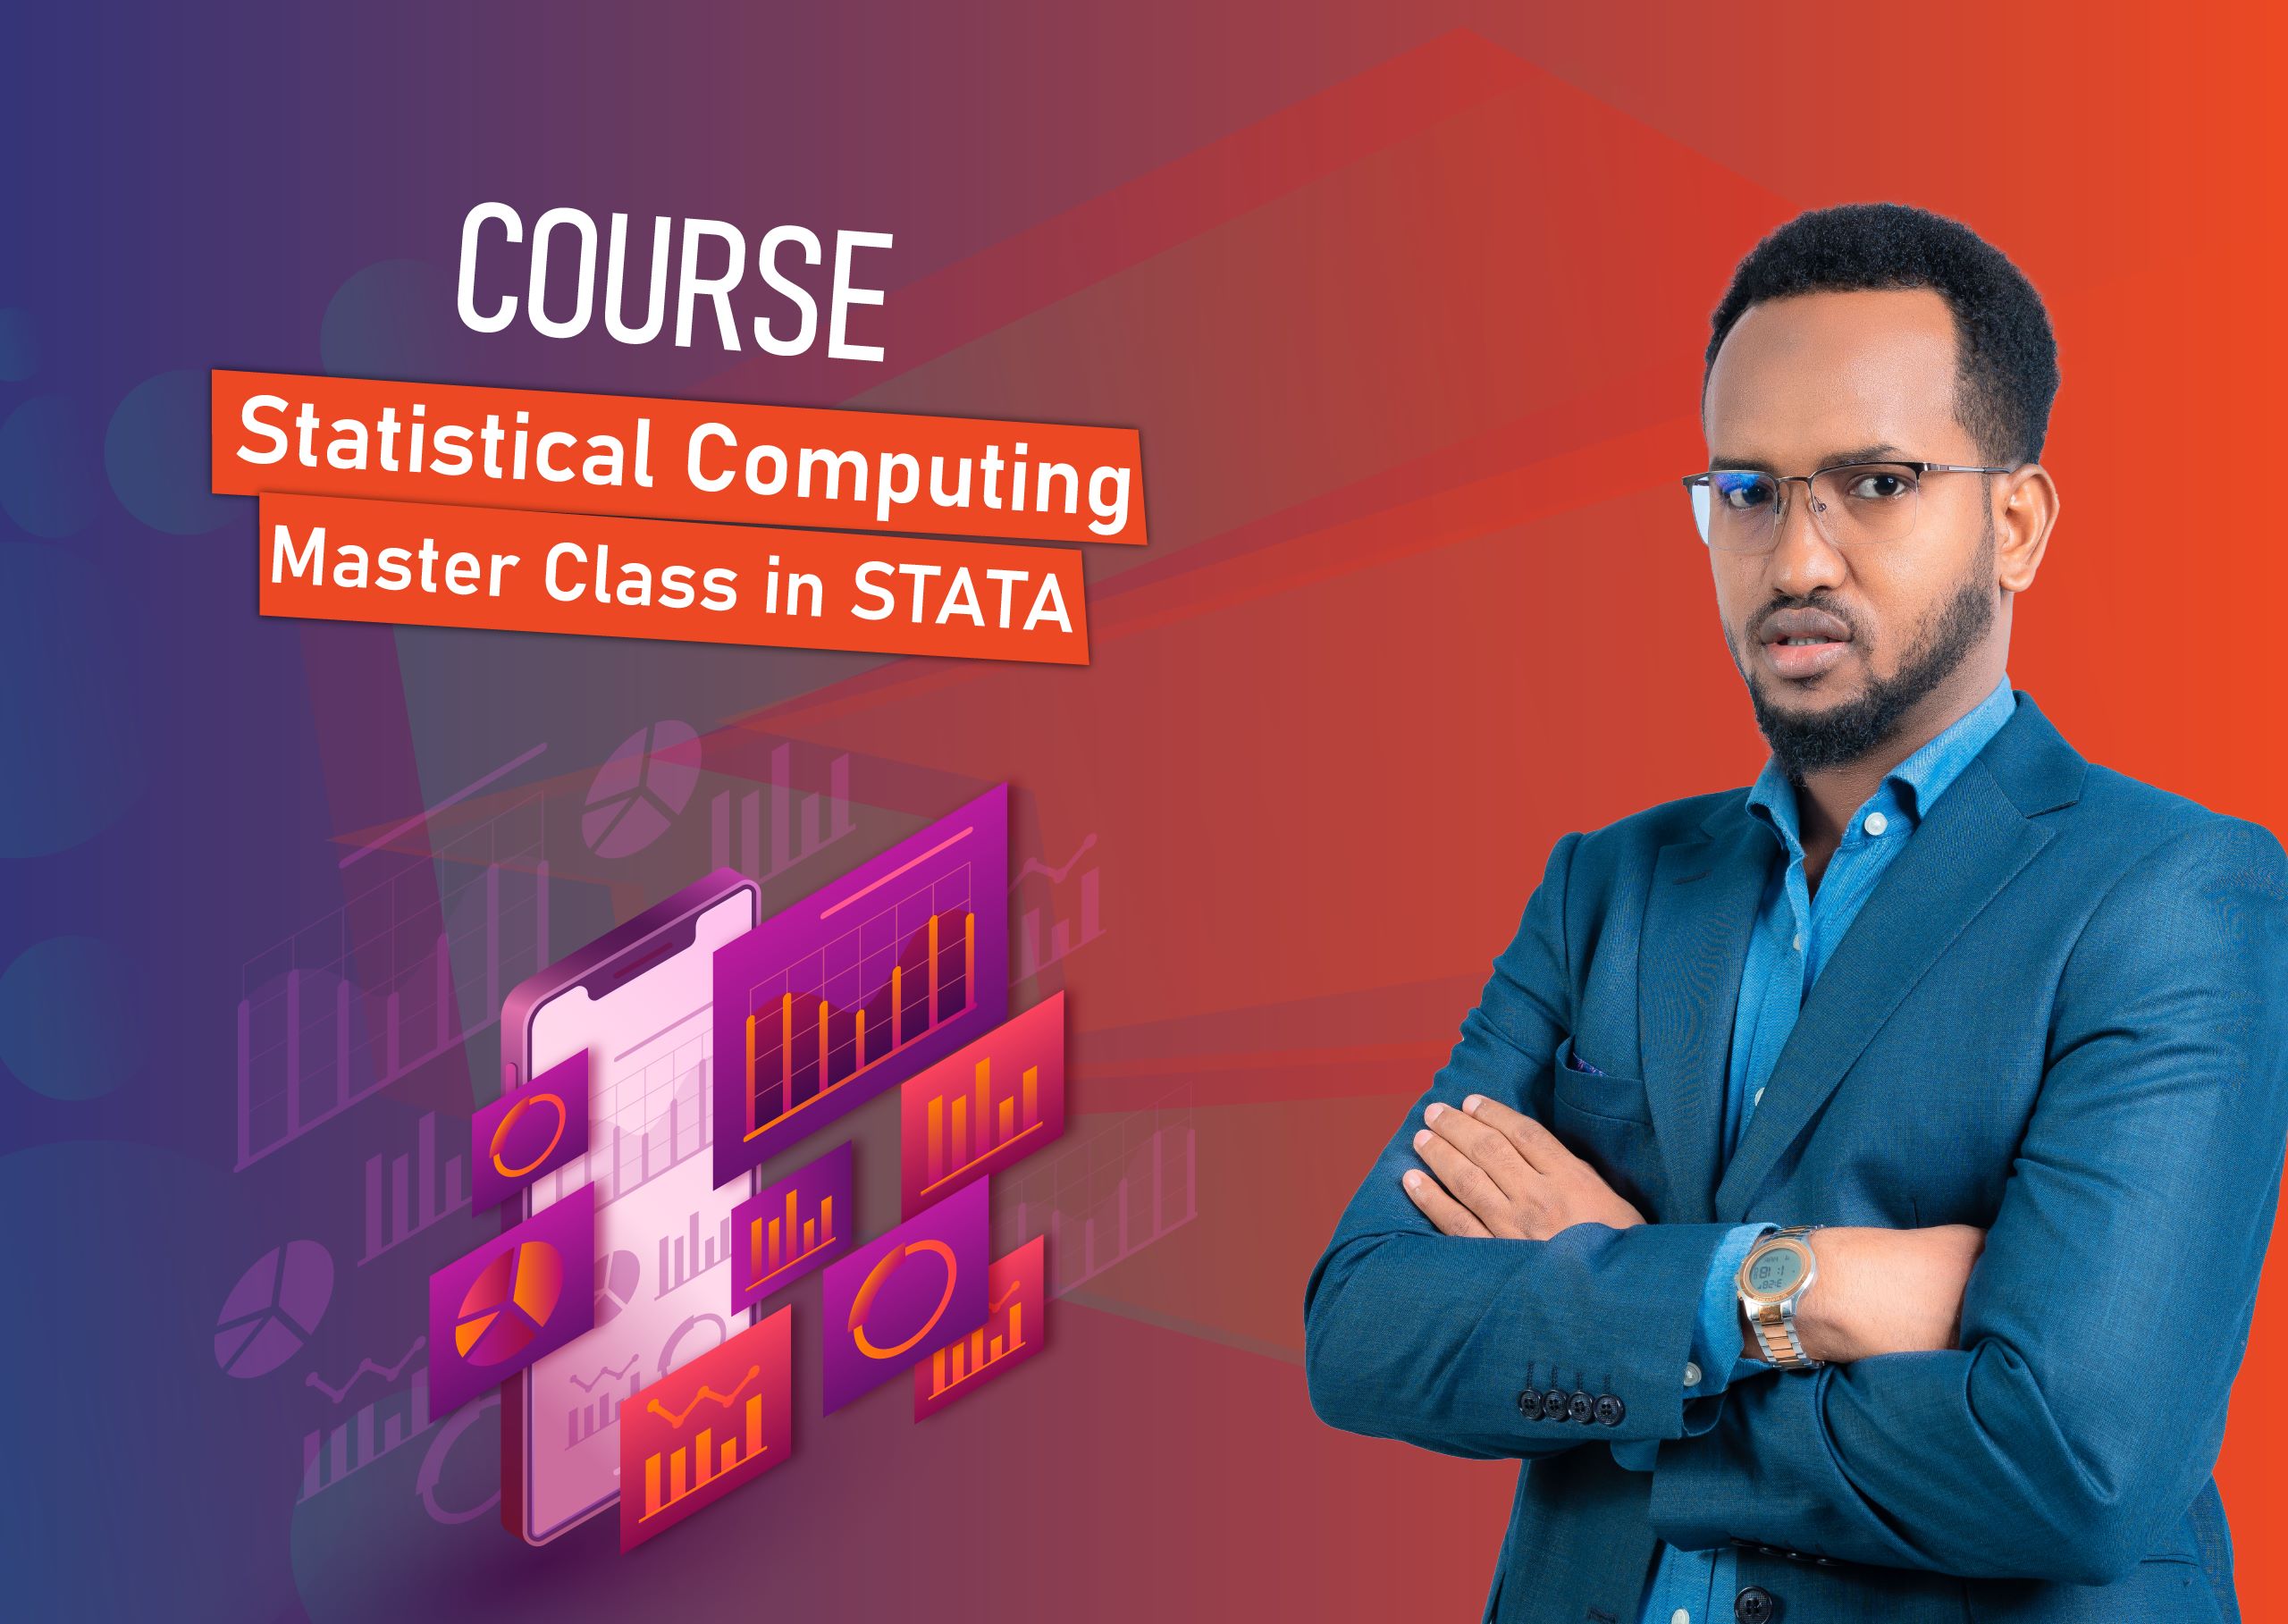 Statistical Computing Master Class in STATA